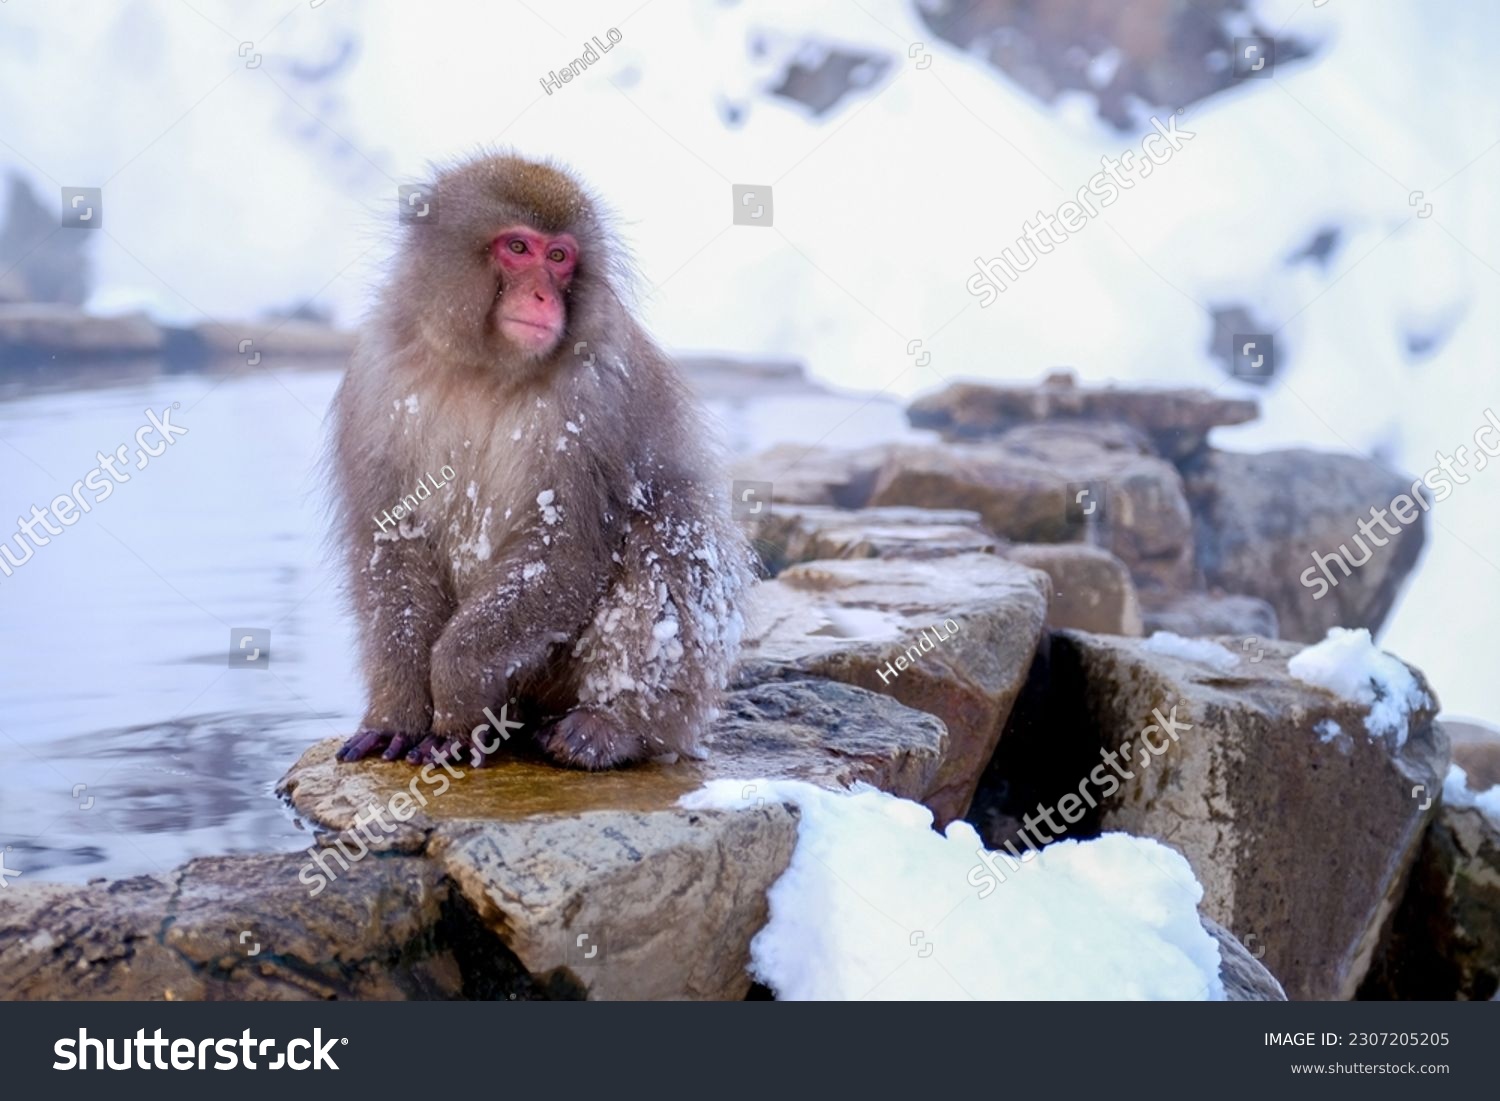 Japanese Snow Monkey japanese snow monkeys playing in hot springs in winter. #2307205205